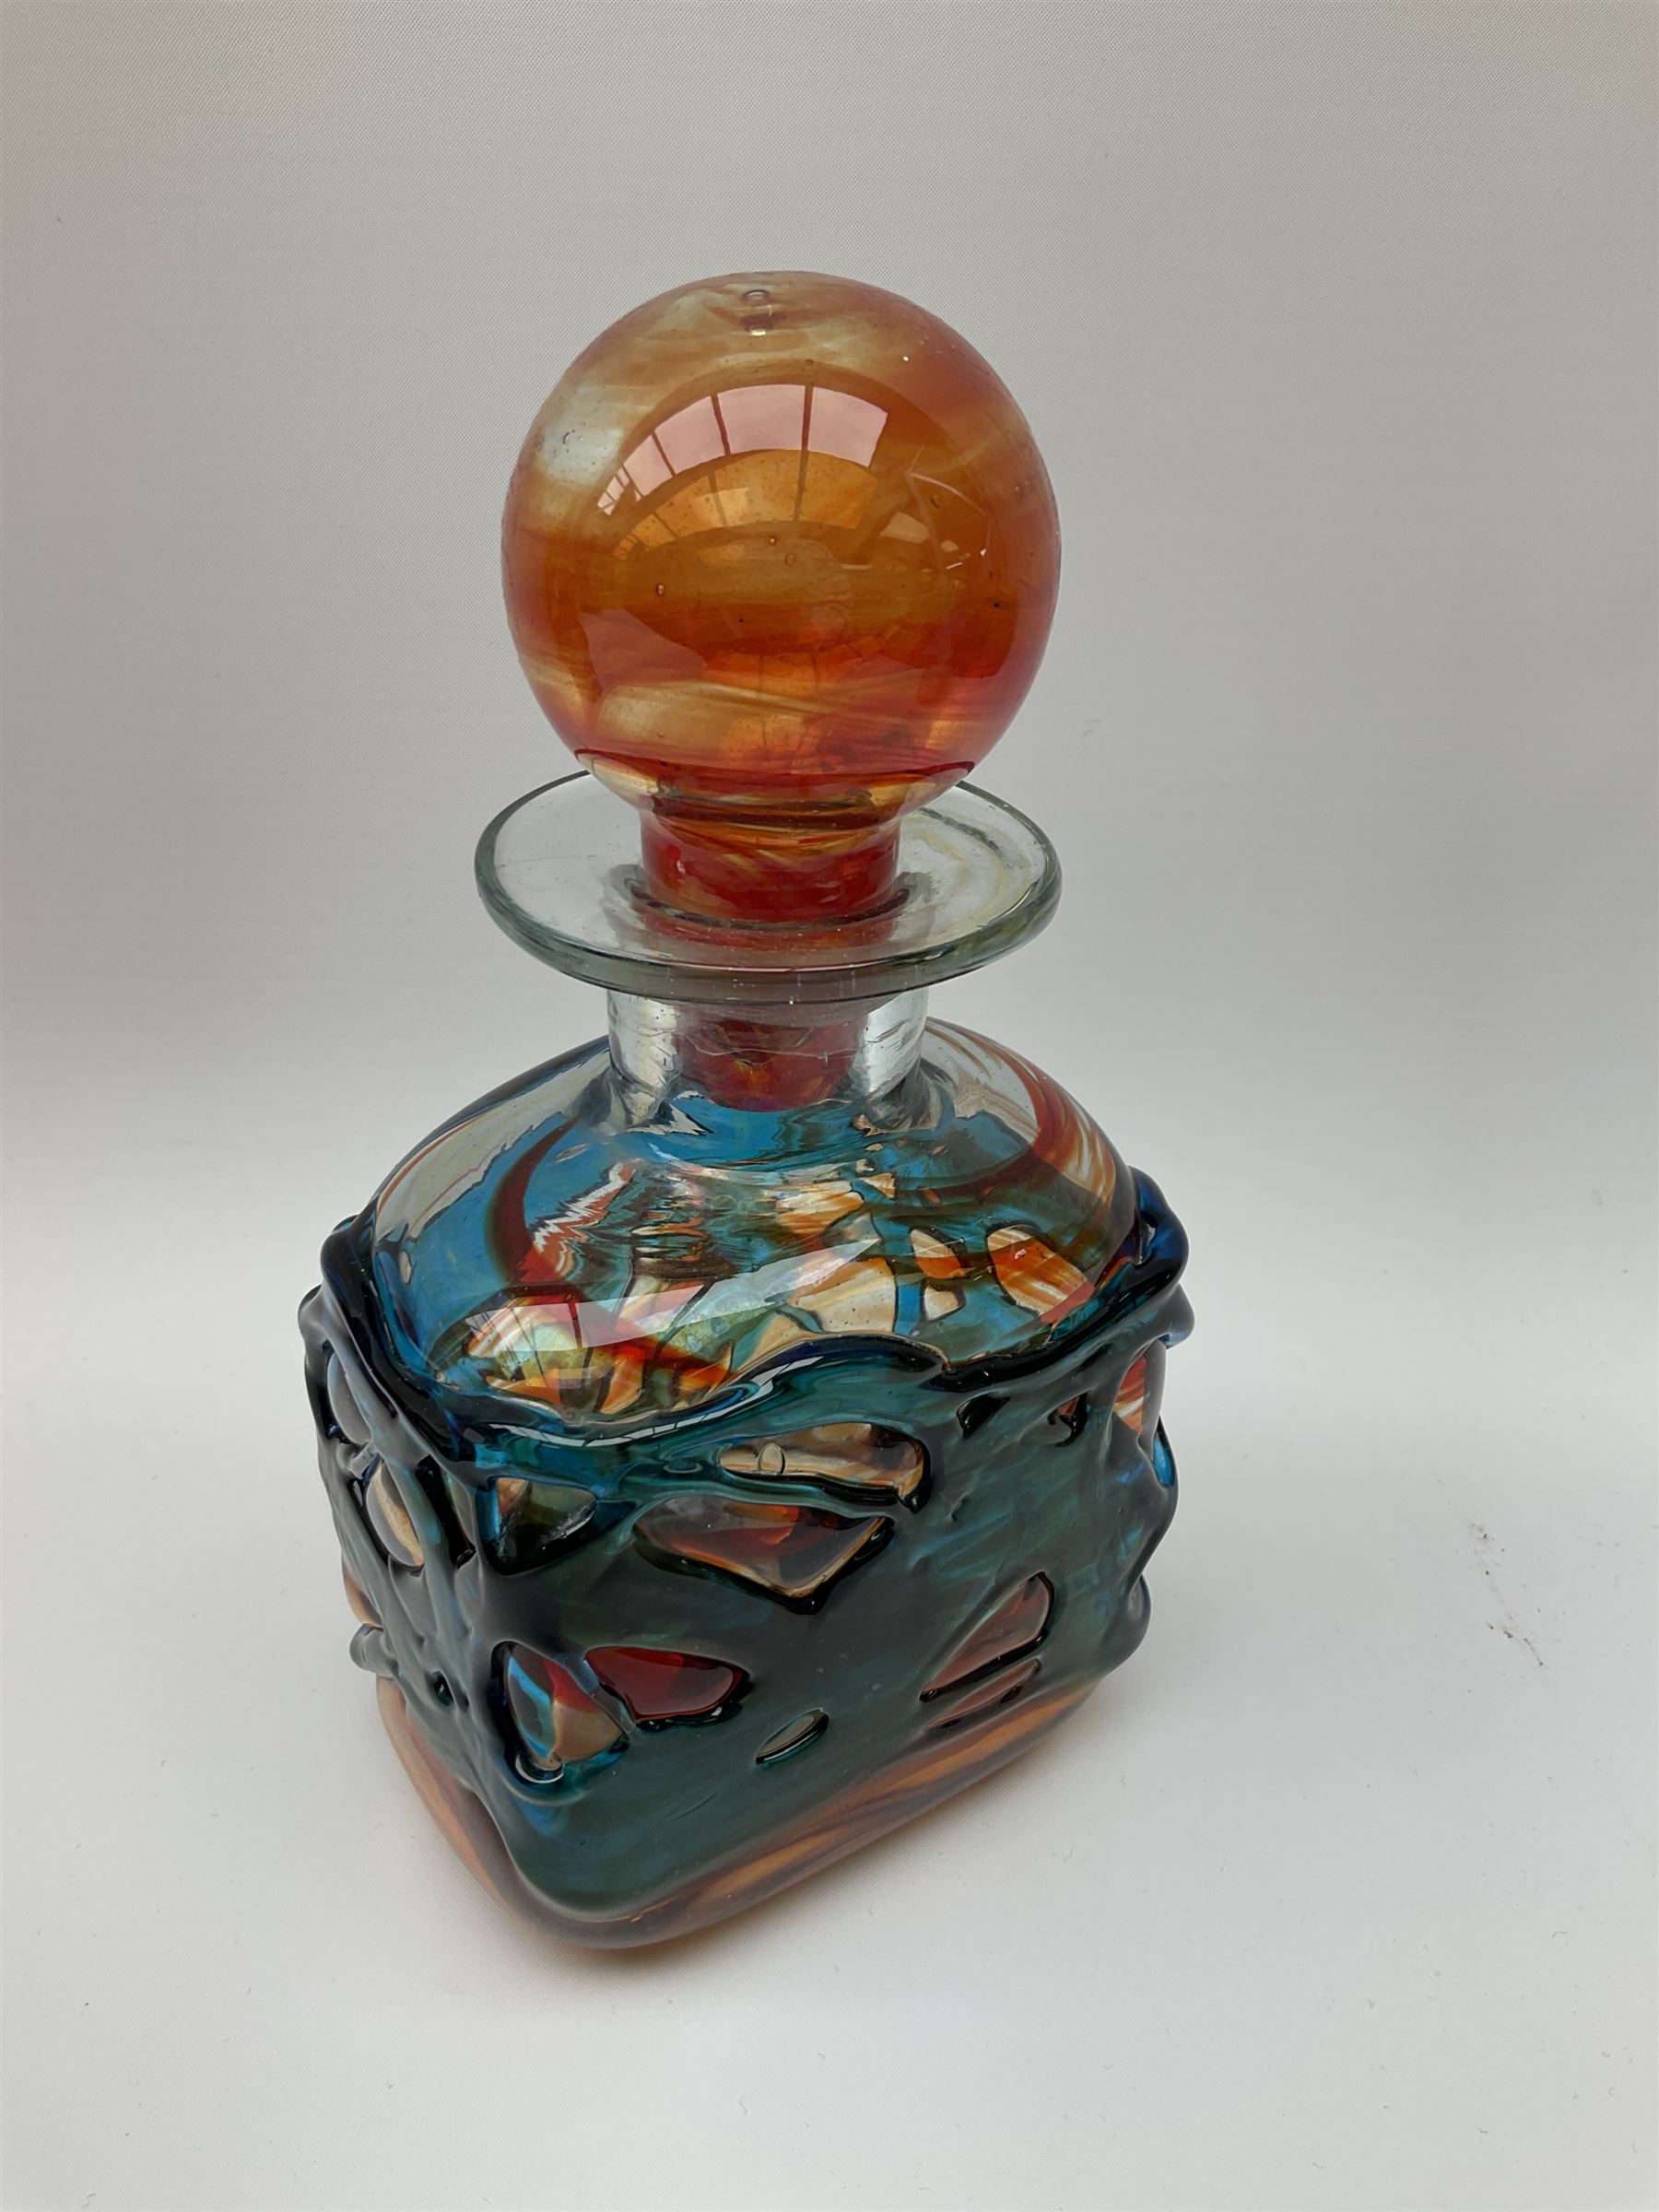 Mdina art glass decanter of red and orange glass with blue trellis work - Image 4 of 18